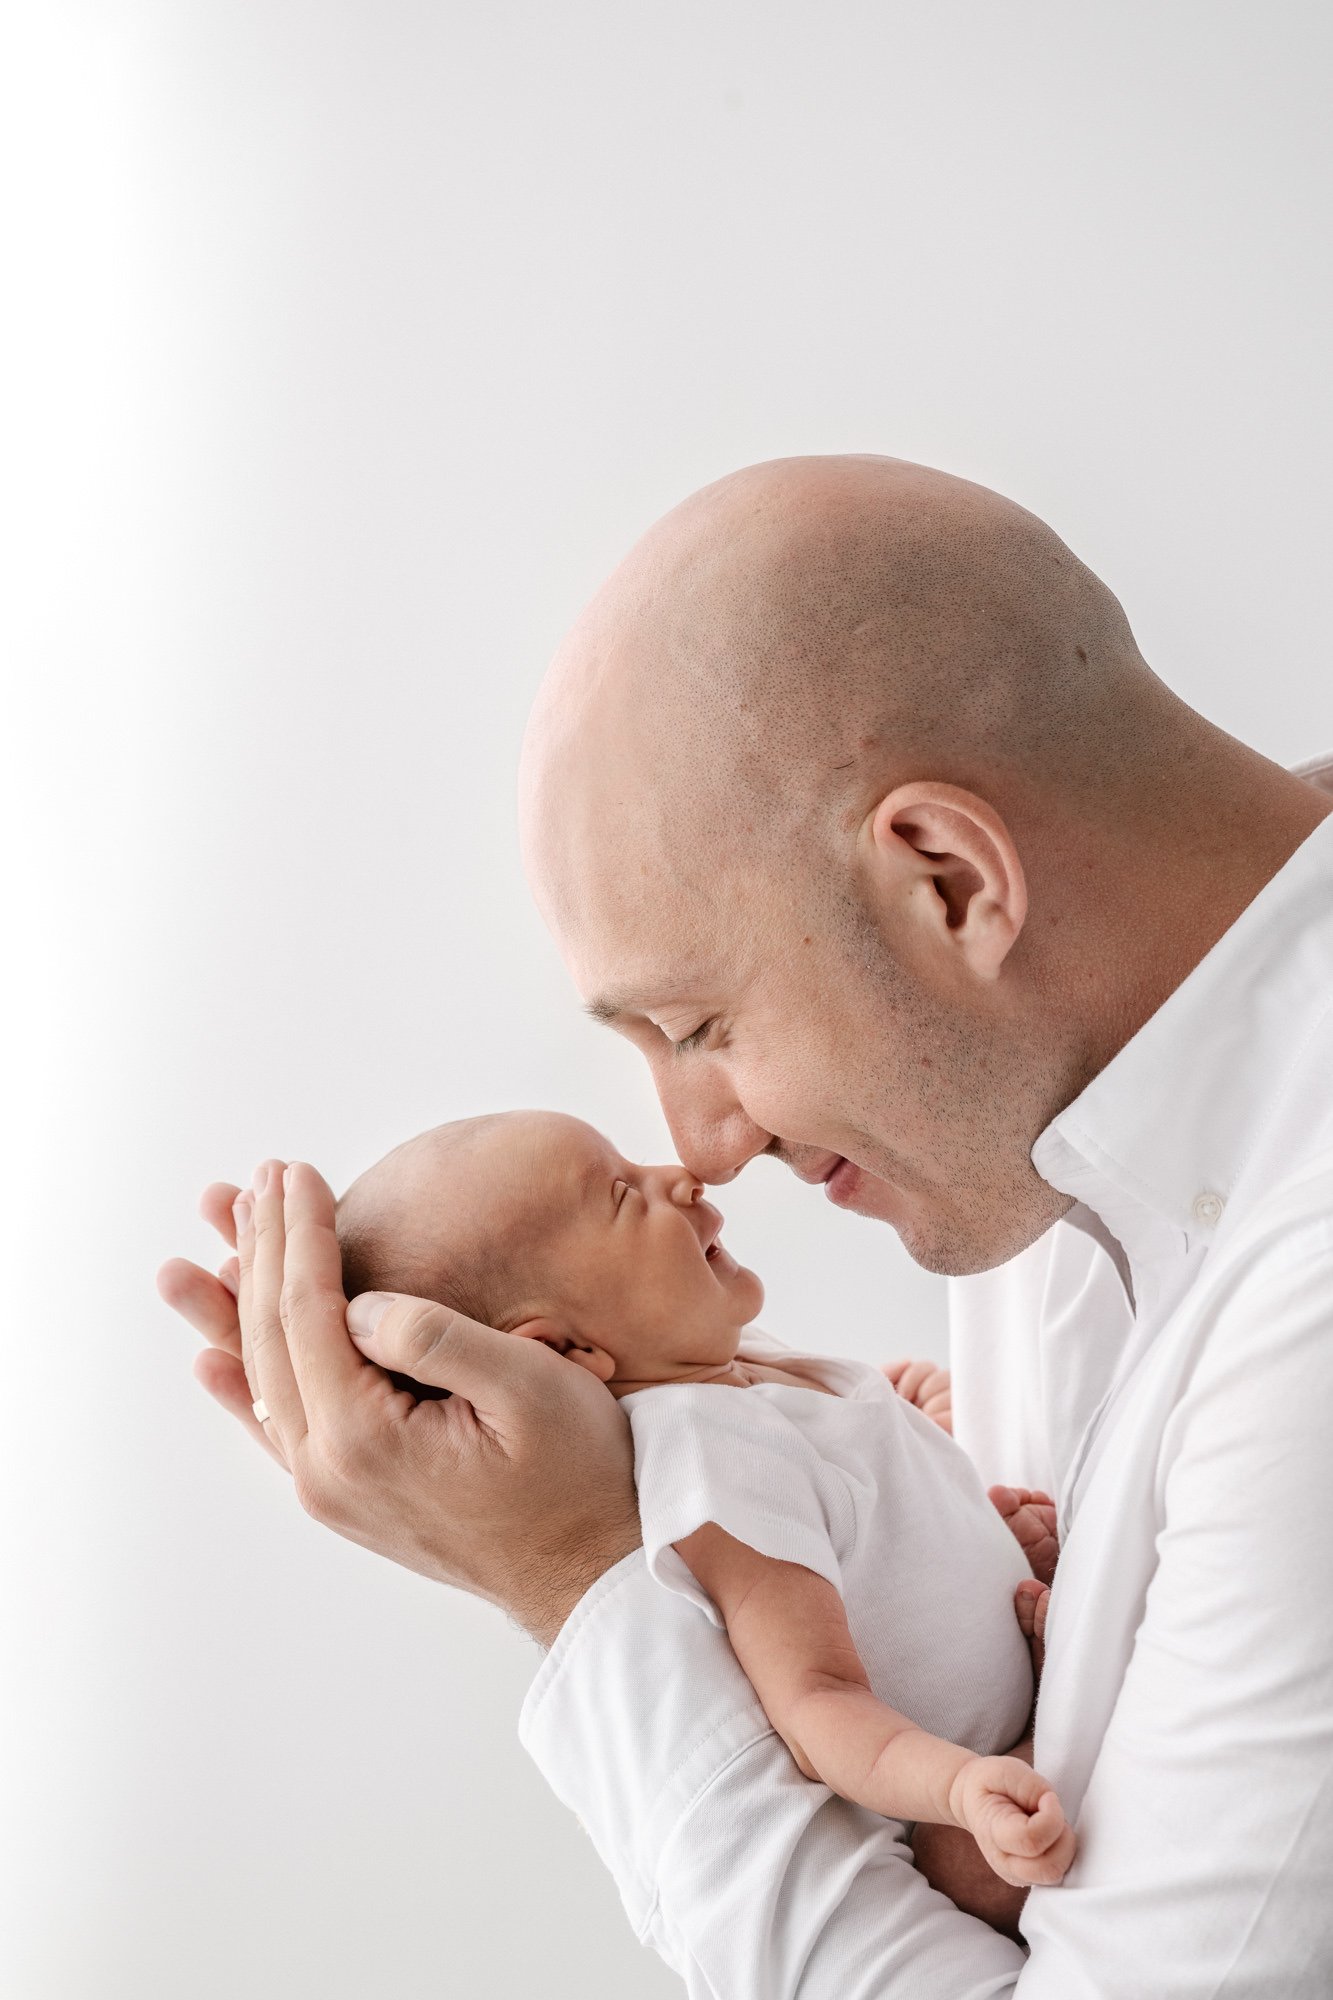  The sweetest dad holds his newborn close to his face so they are nose to nose. This classic pose was captured by Nicole Hawkins photography, a New Jersey based photographer.&nbsp; #instudionewbornsession #NicoleHawkinsphotography #newbornportraits #